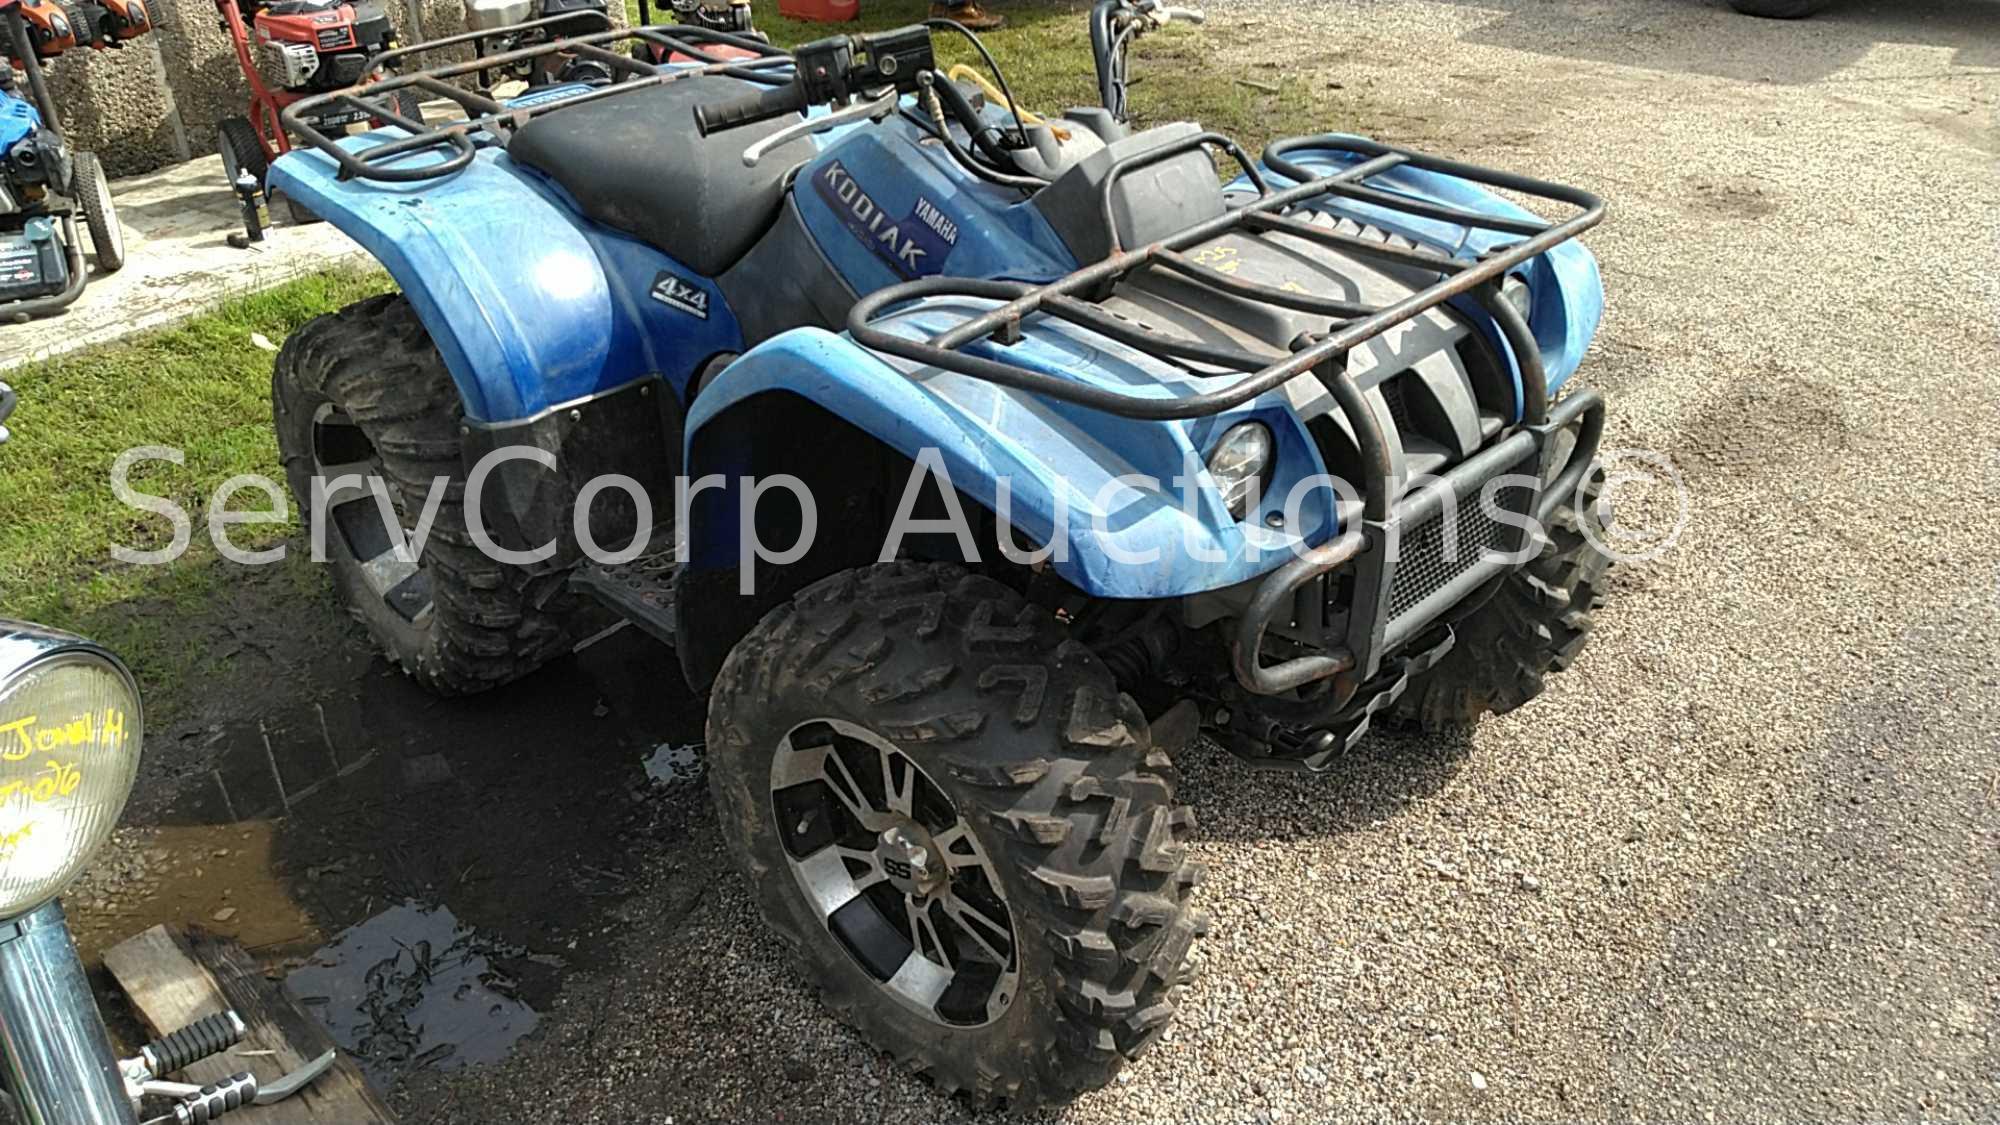 Yamaha Kodiak 4x4, VIN: ?Y4AJ07Y84A017312, PARTS ONLY, Year estimated to be 2004, not 2017